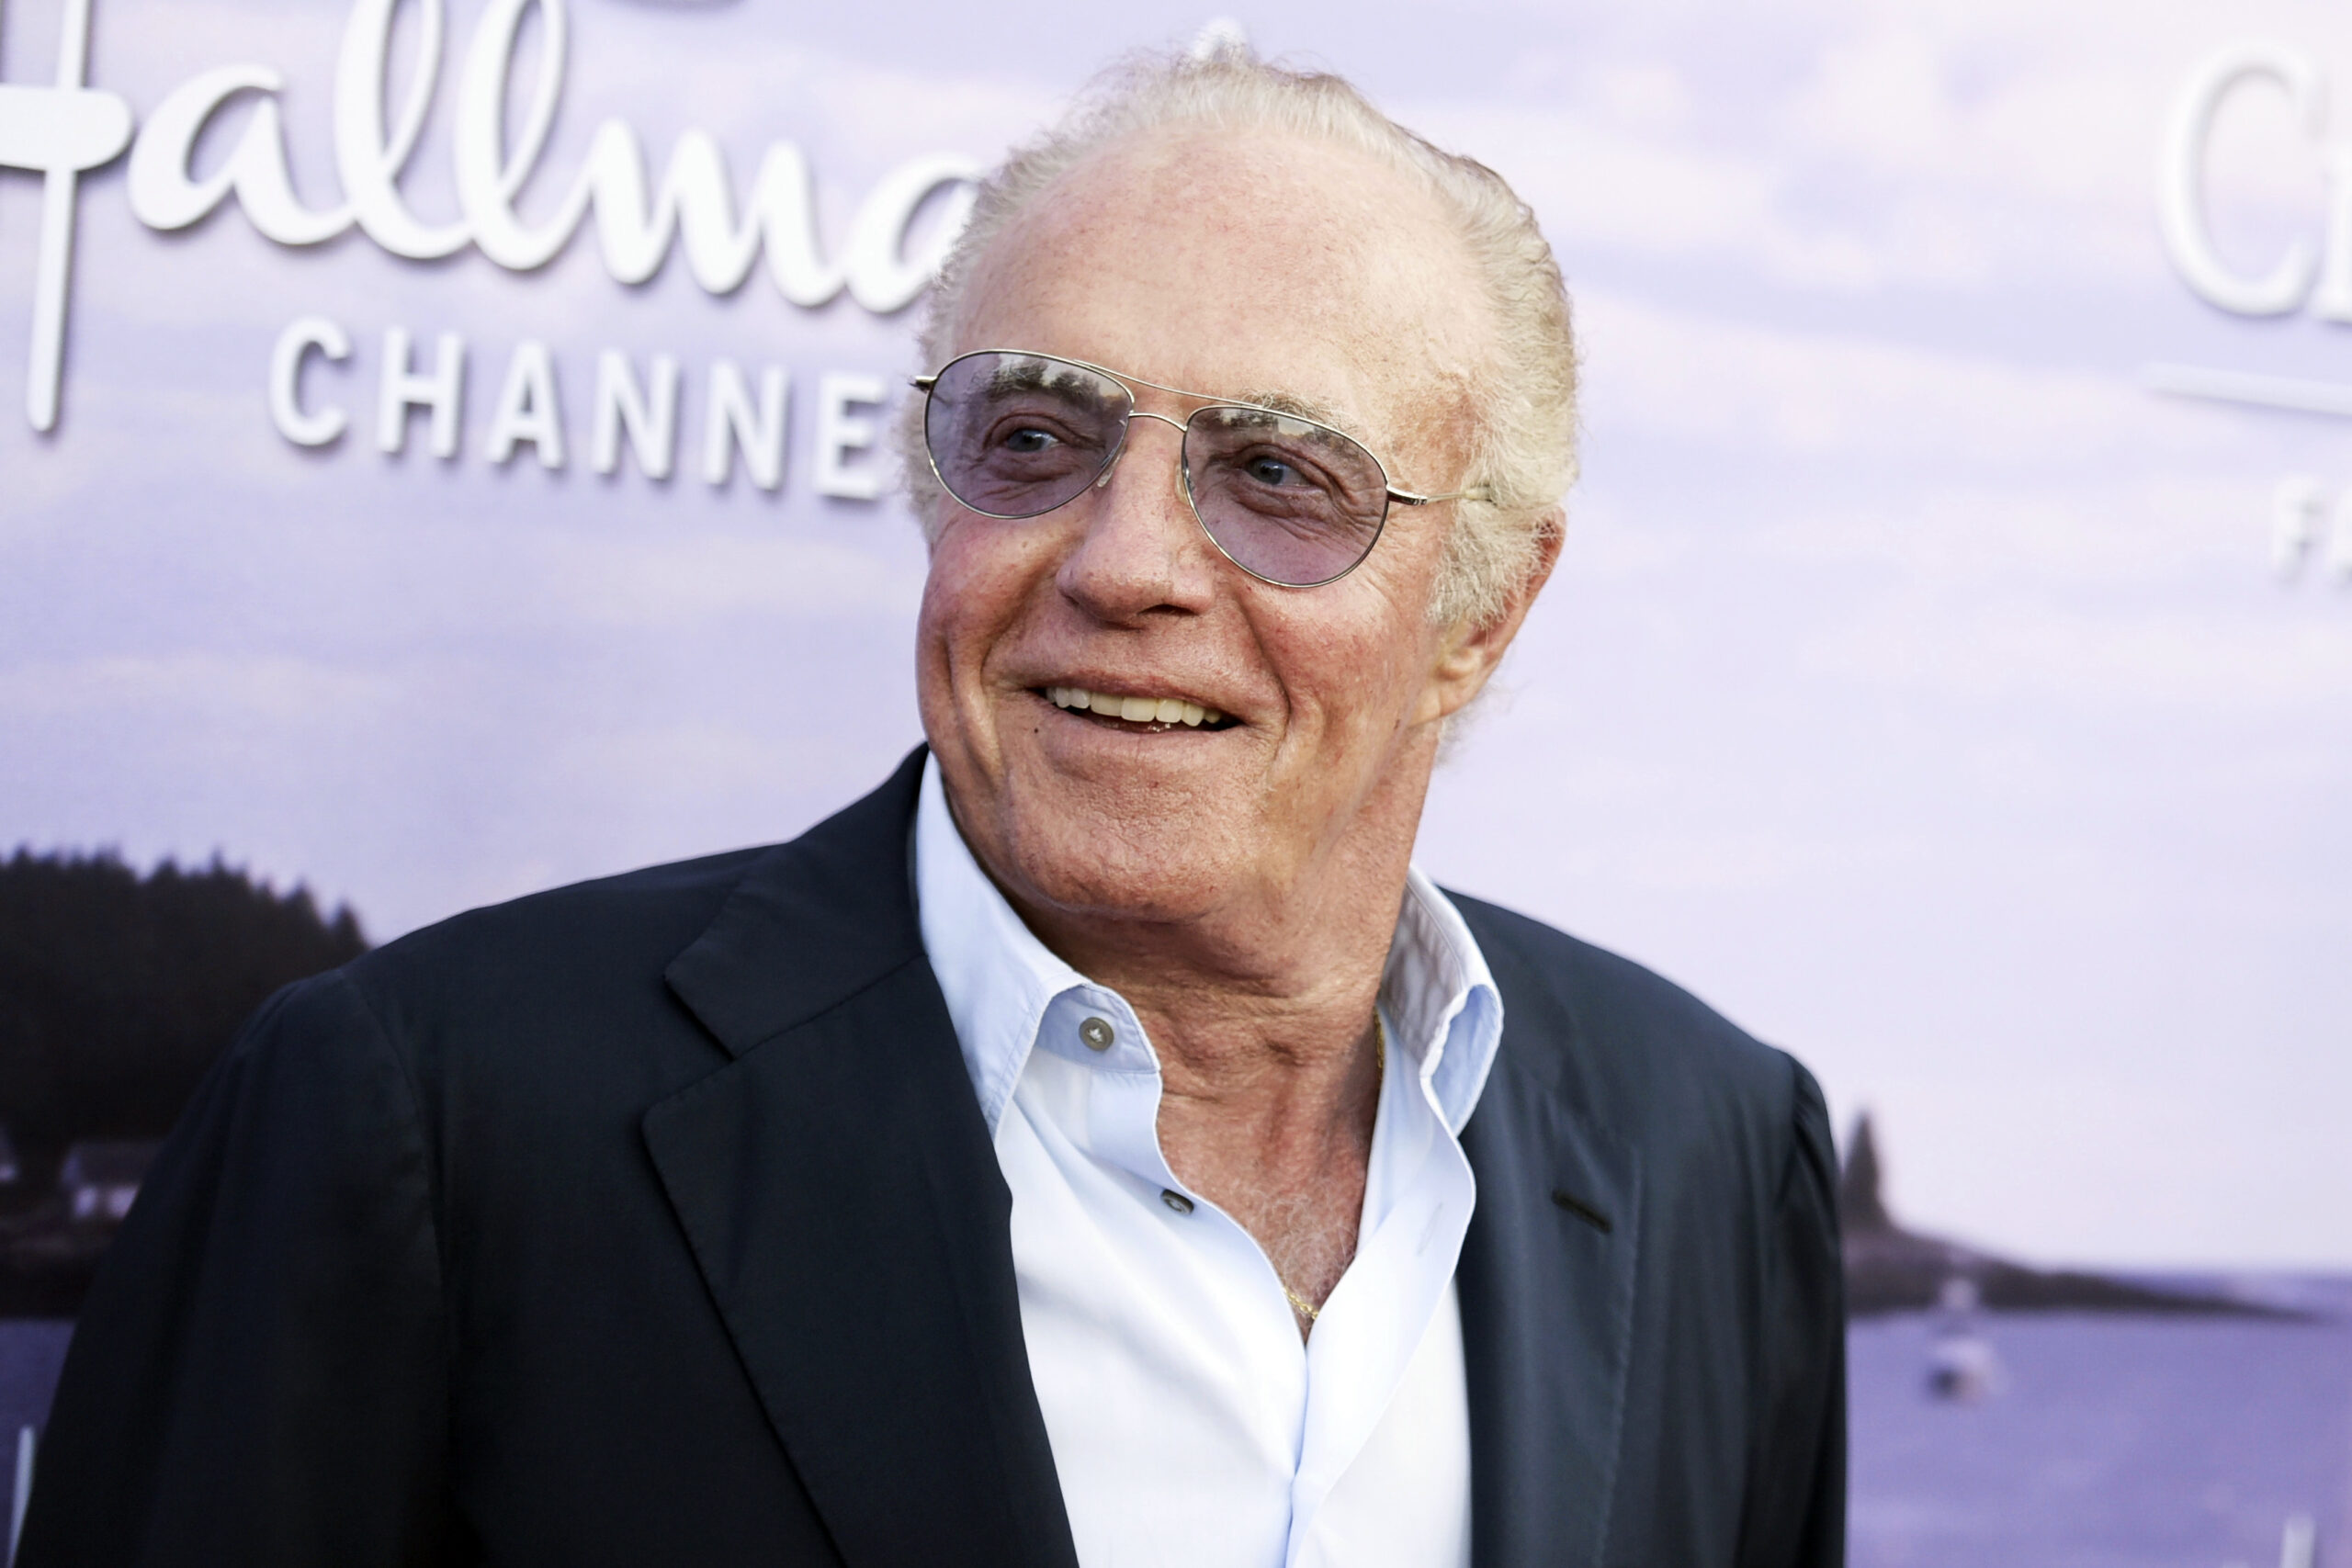 FILE - James Caan attends the 2016 Summer TCA "Hallmark Event" on July 27, 2016, in Beverly Hills, Calif. Caan, whose roles included "The Godfather," "Brian’s Song" and "Misery," died Wednesday, July 6, 2022, at age 82. (Photo by Richard Shotwell/Invision/AP, File)